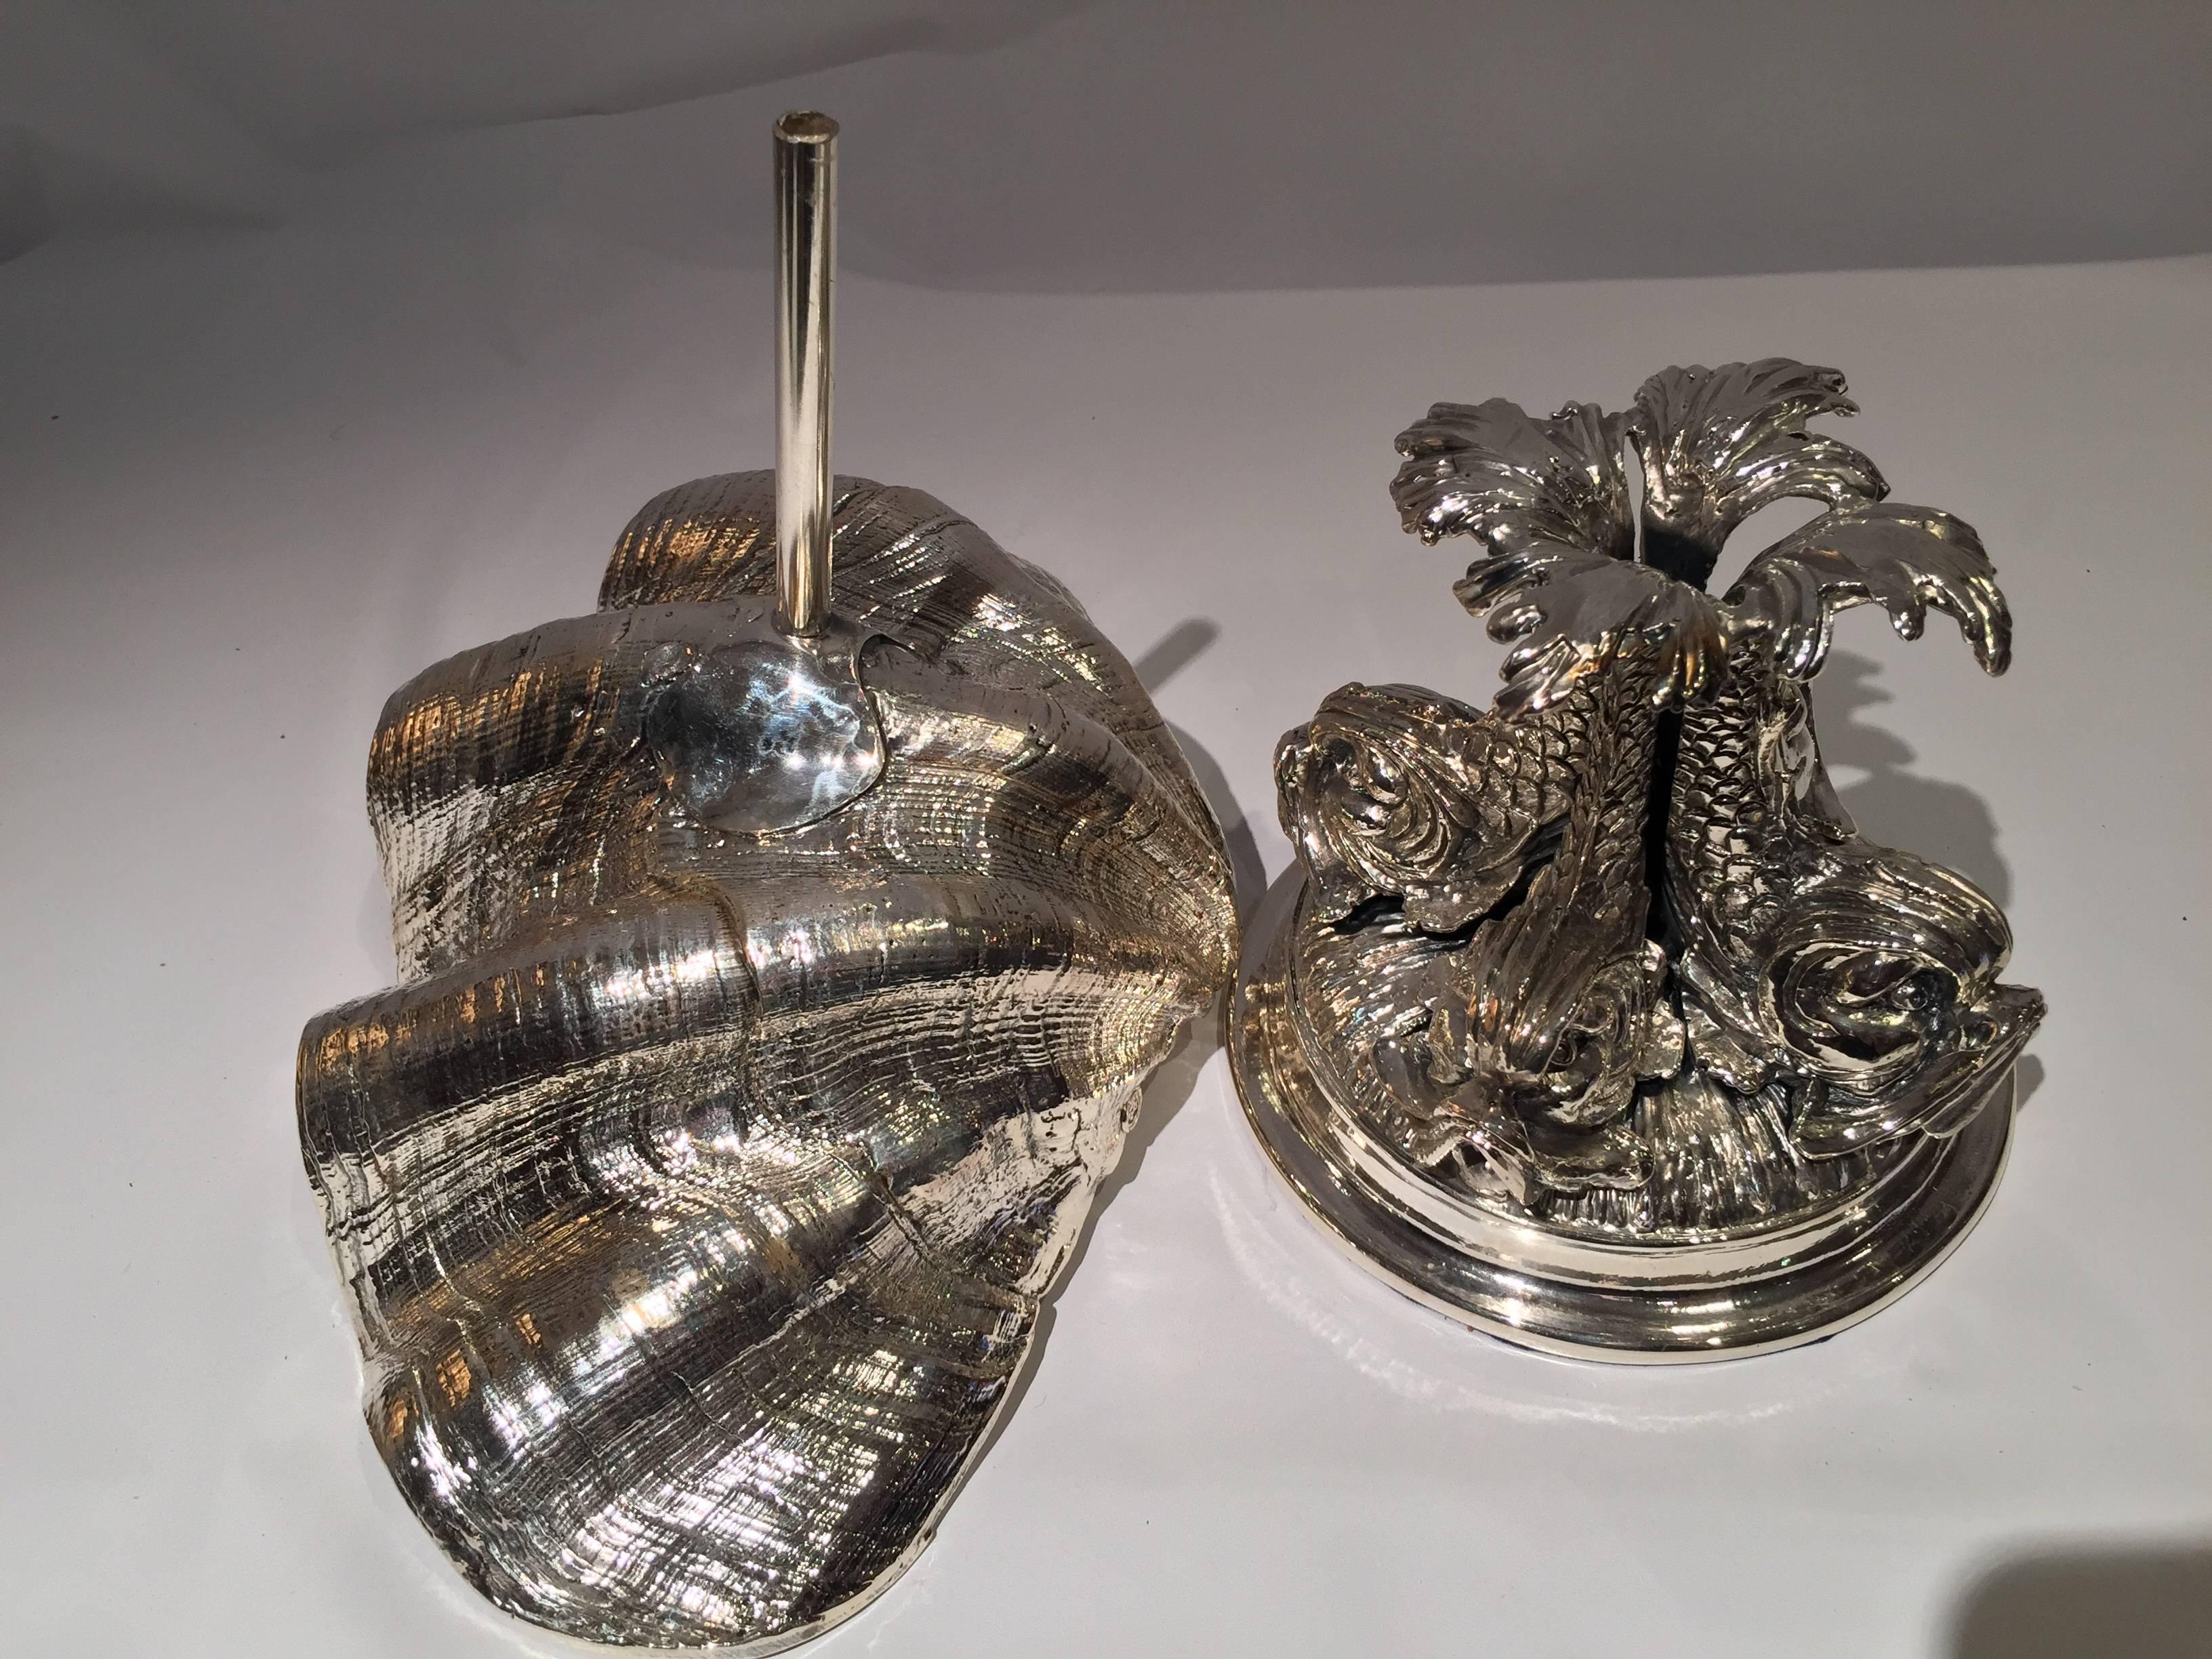 Creel and Gow silvered resin clam shell mounted on a Cellini style triton base. This functional 925 Italian silver coated centerpiece is made in Rome.